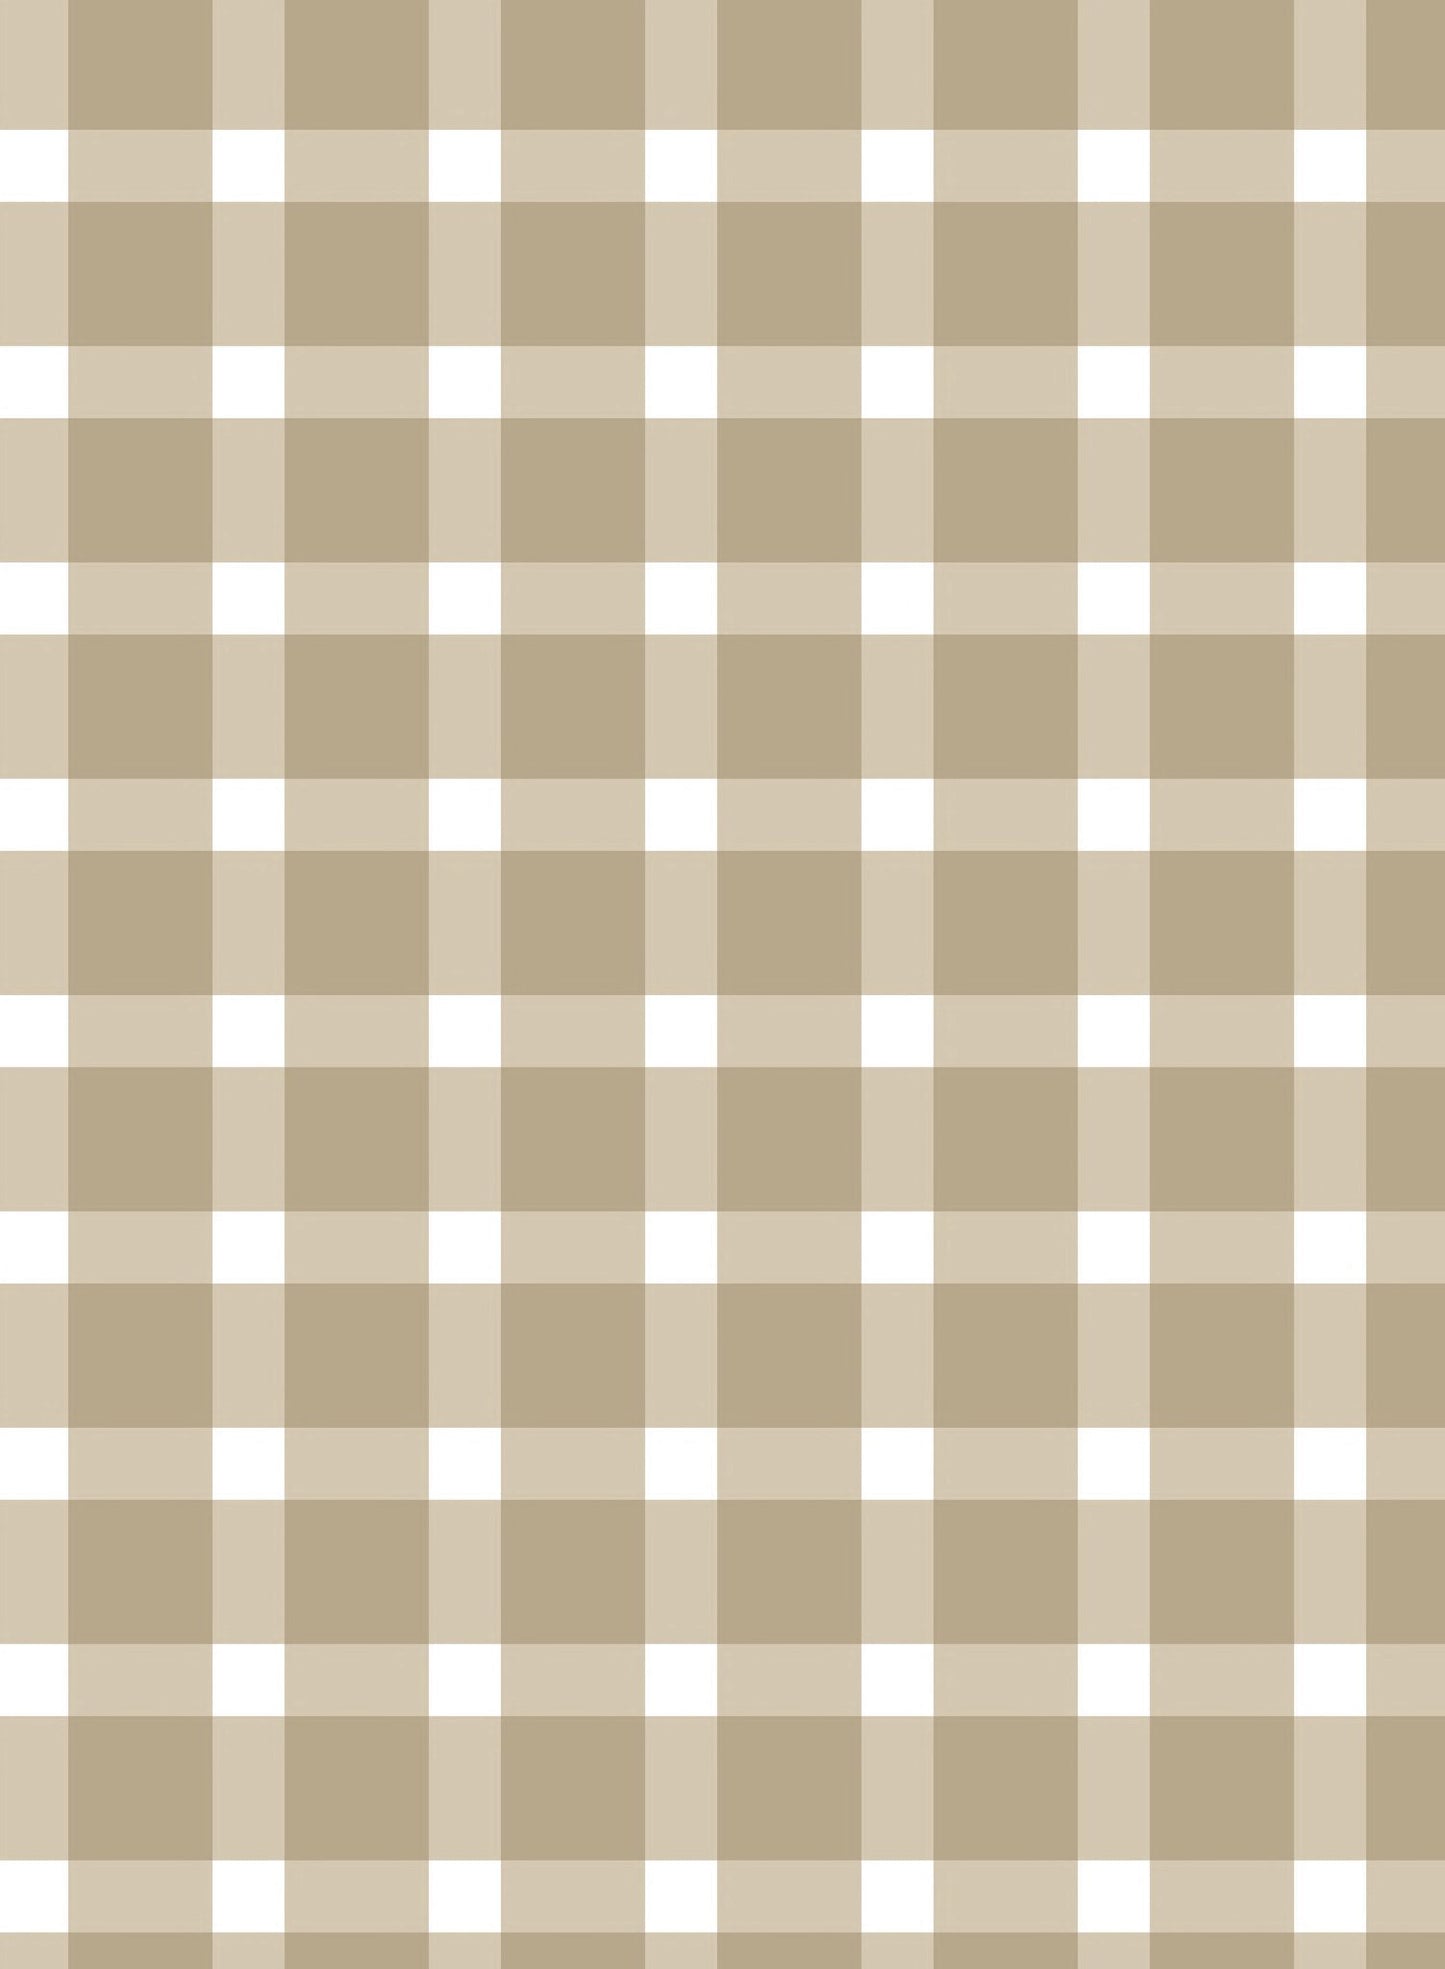 Dorothy is a minimalist wallpaper by Opposite Wall of a soft pastel checkered pattern.